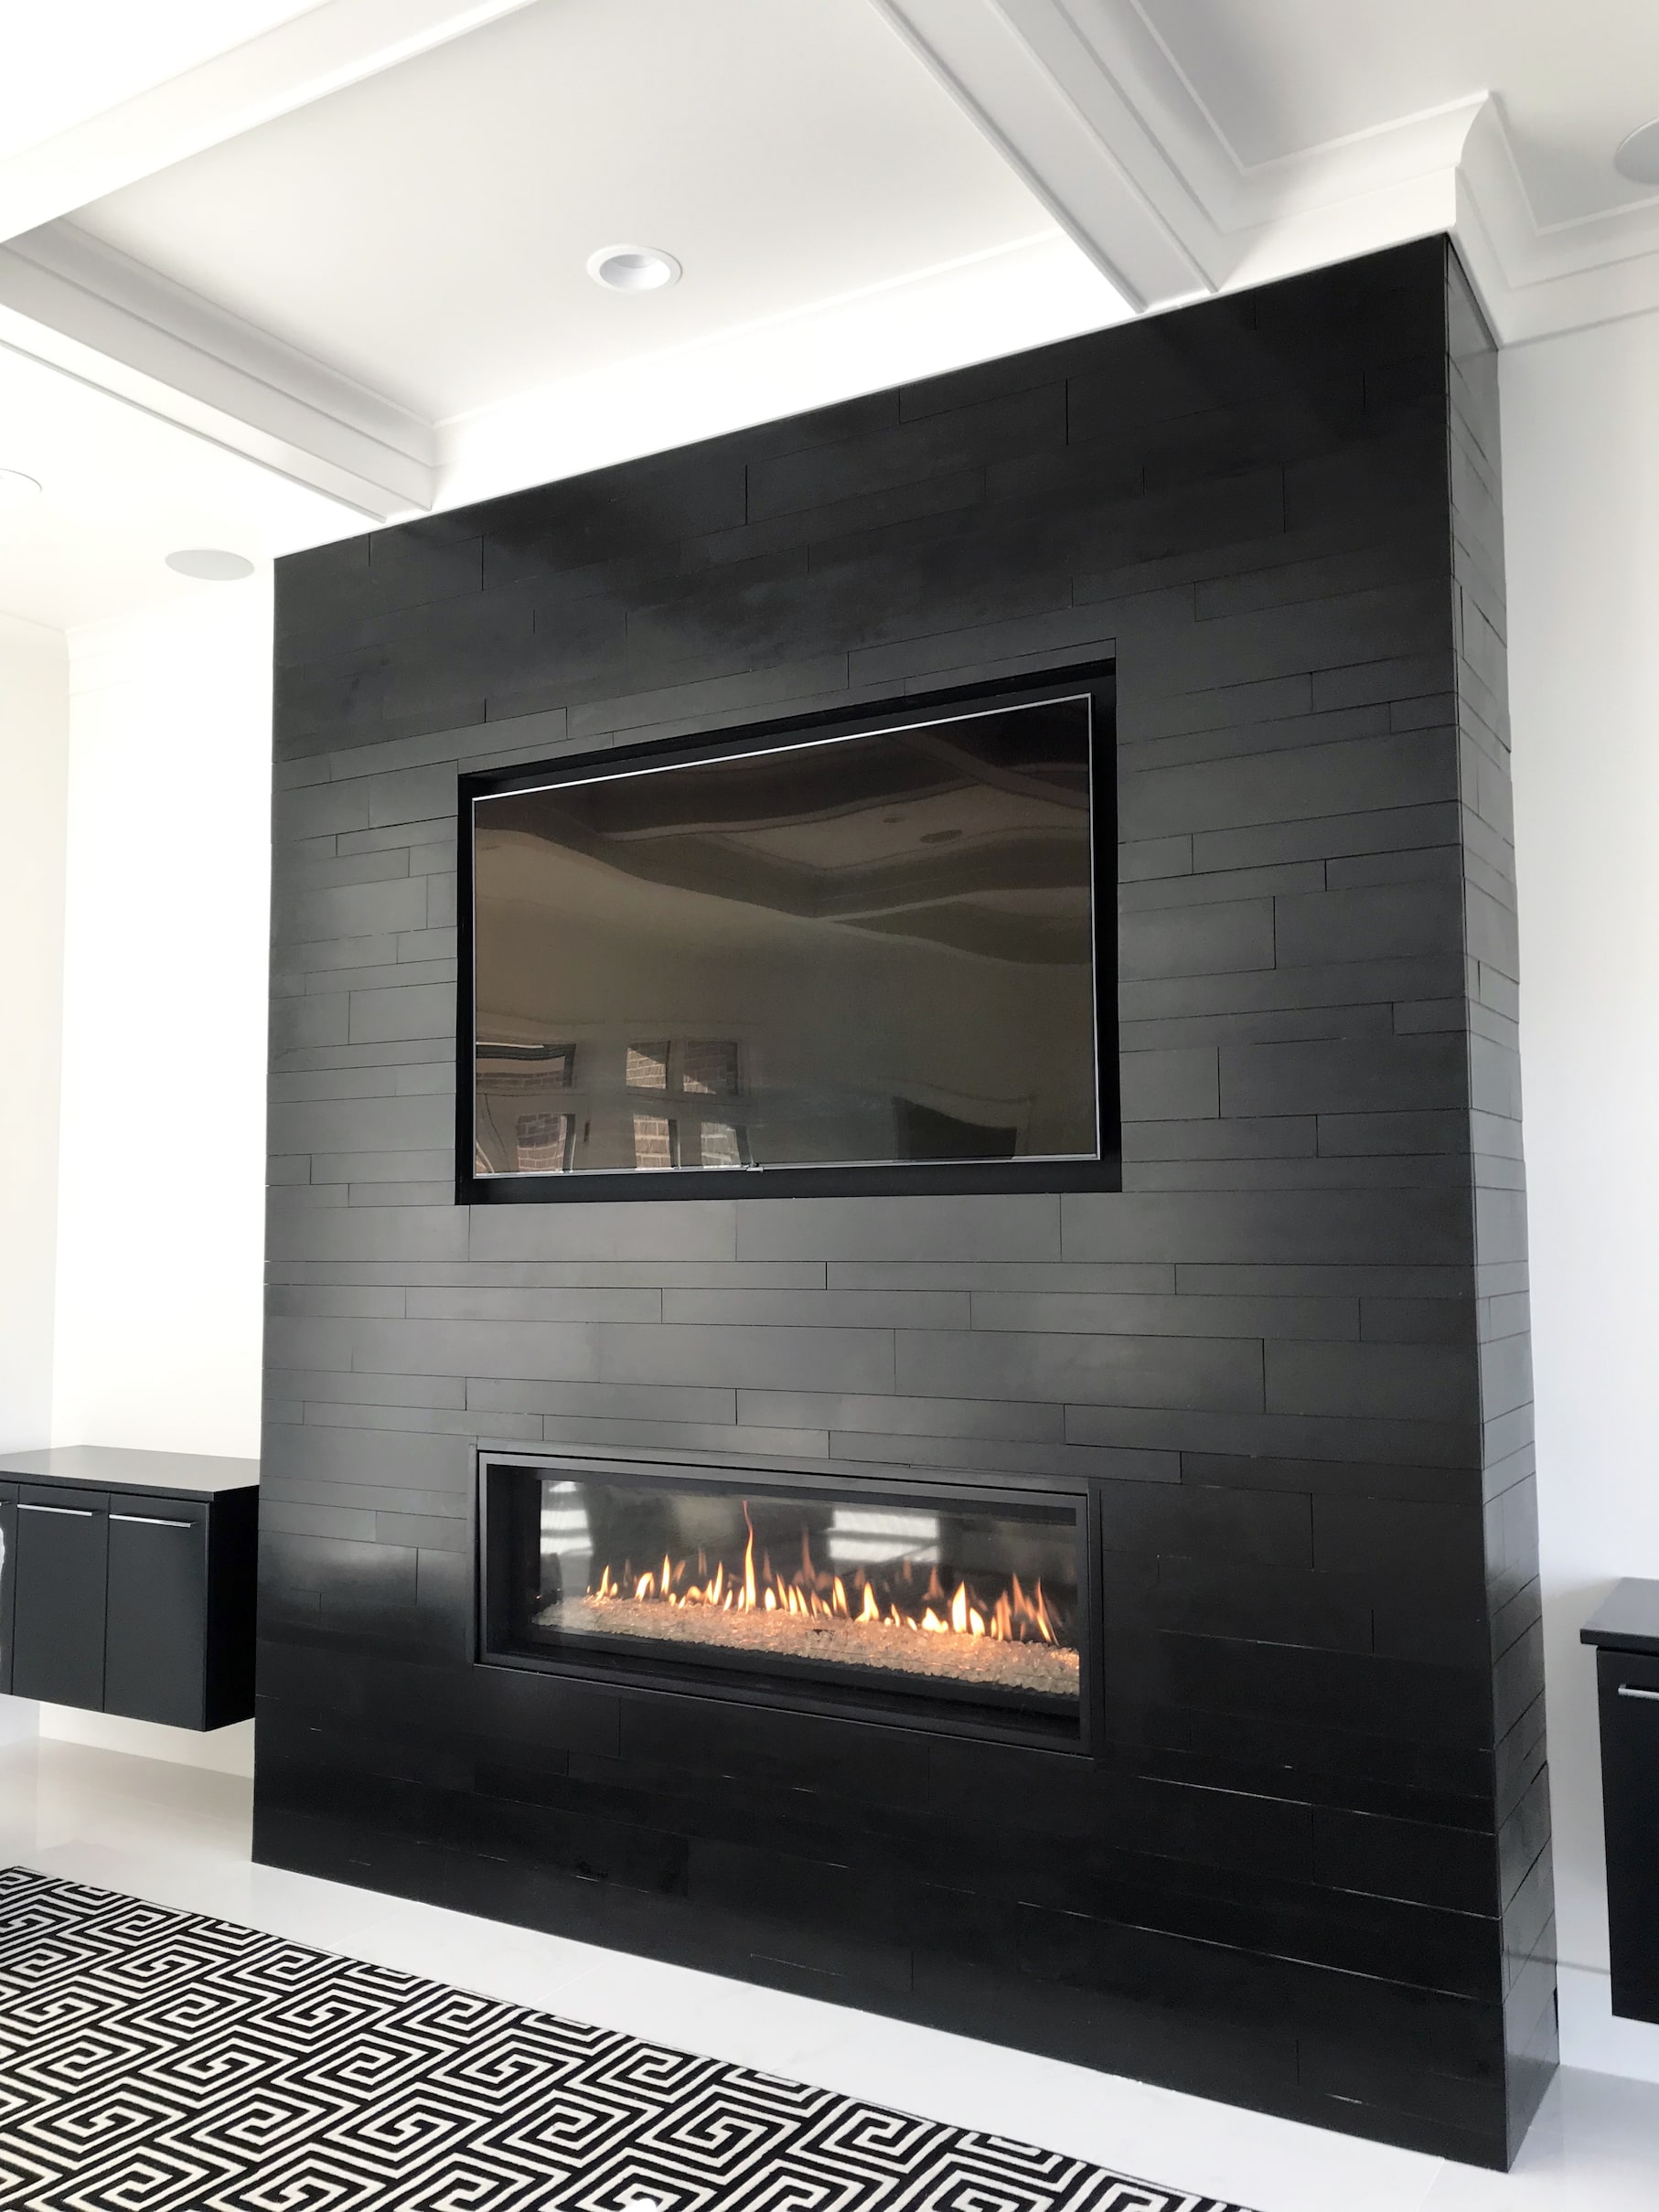 Norstone Ebony Planc Large Format wall tile used on a residential fireplace